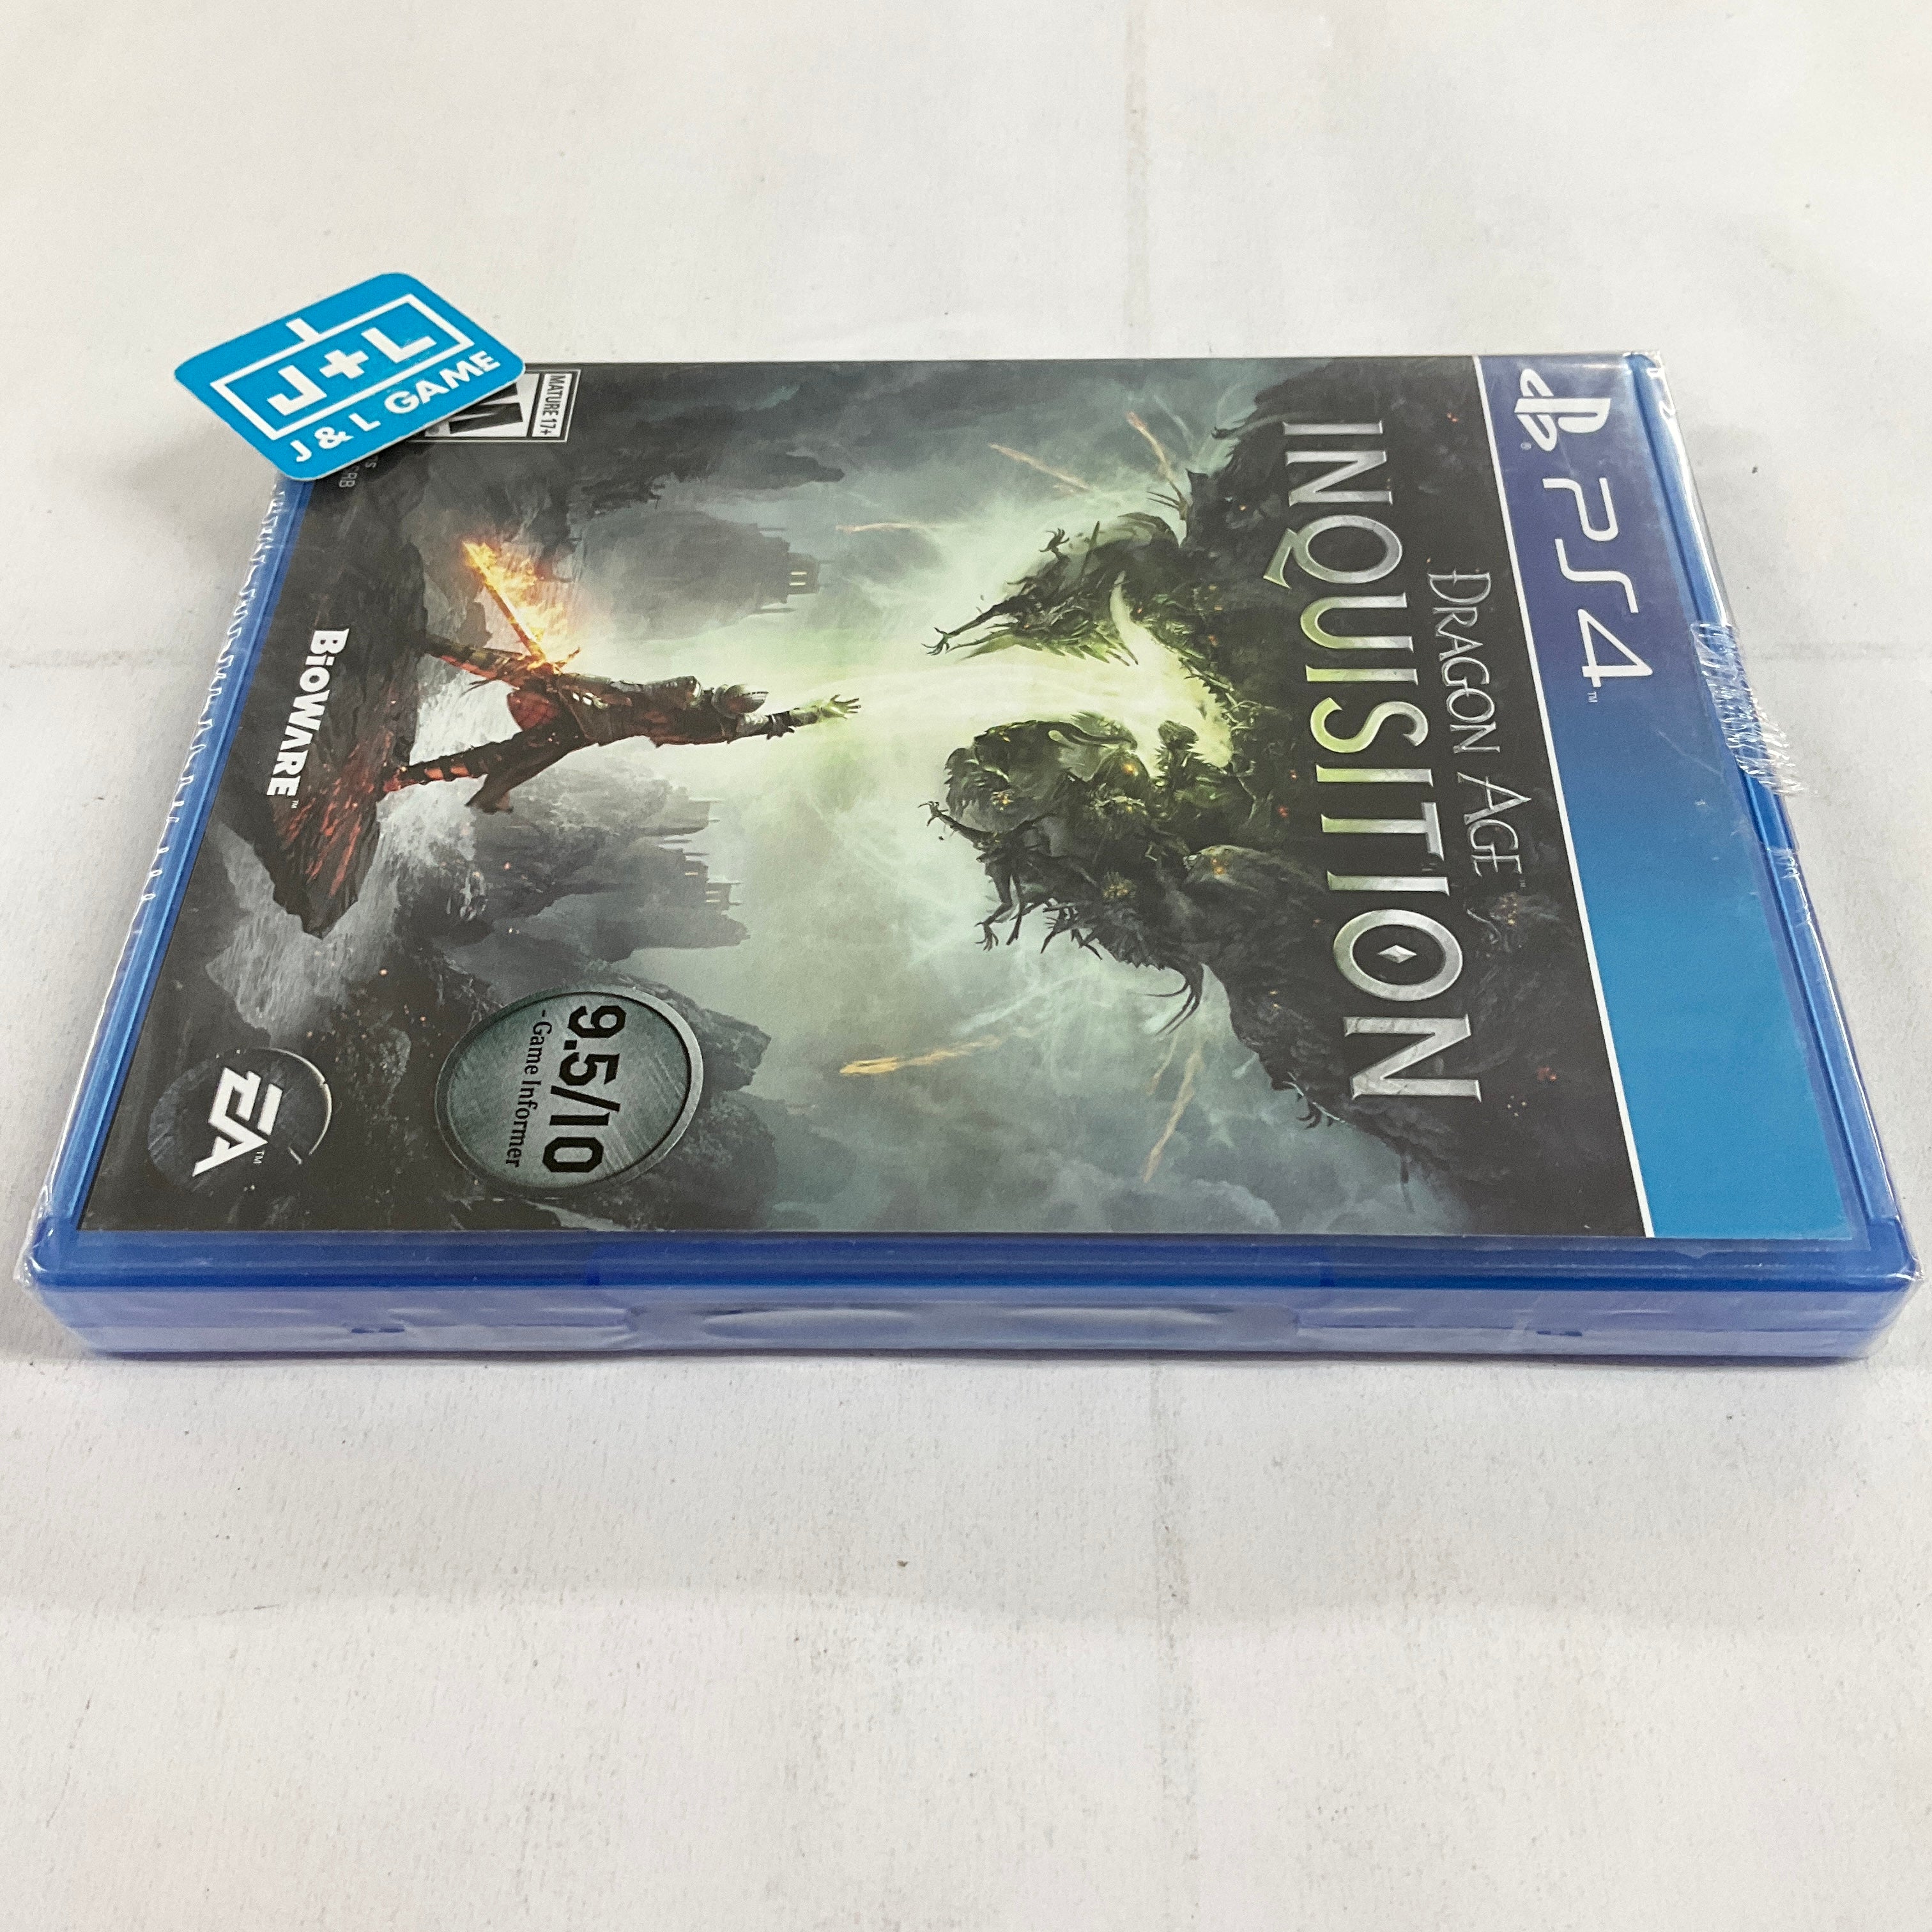 Dragon Age Inquisition - (PS4) PlayStation 4 Video Games Electronic Arts   